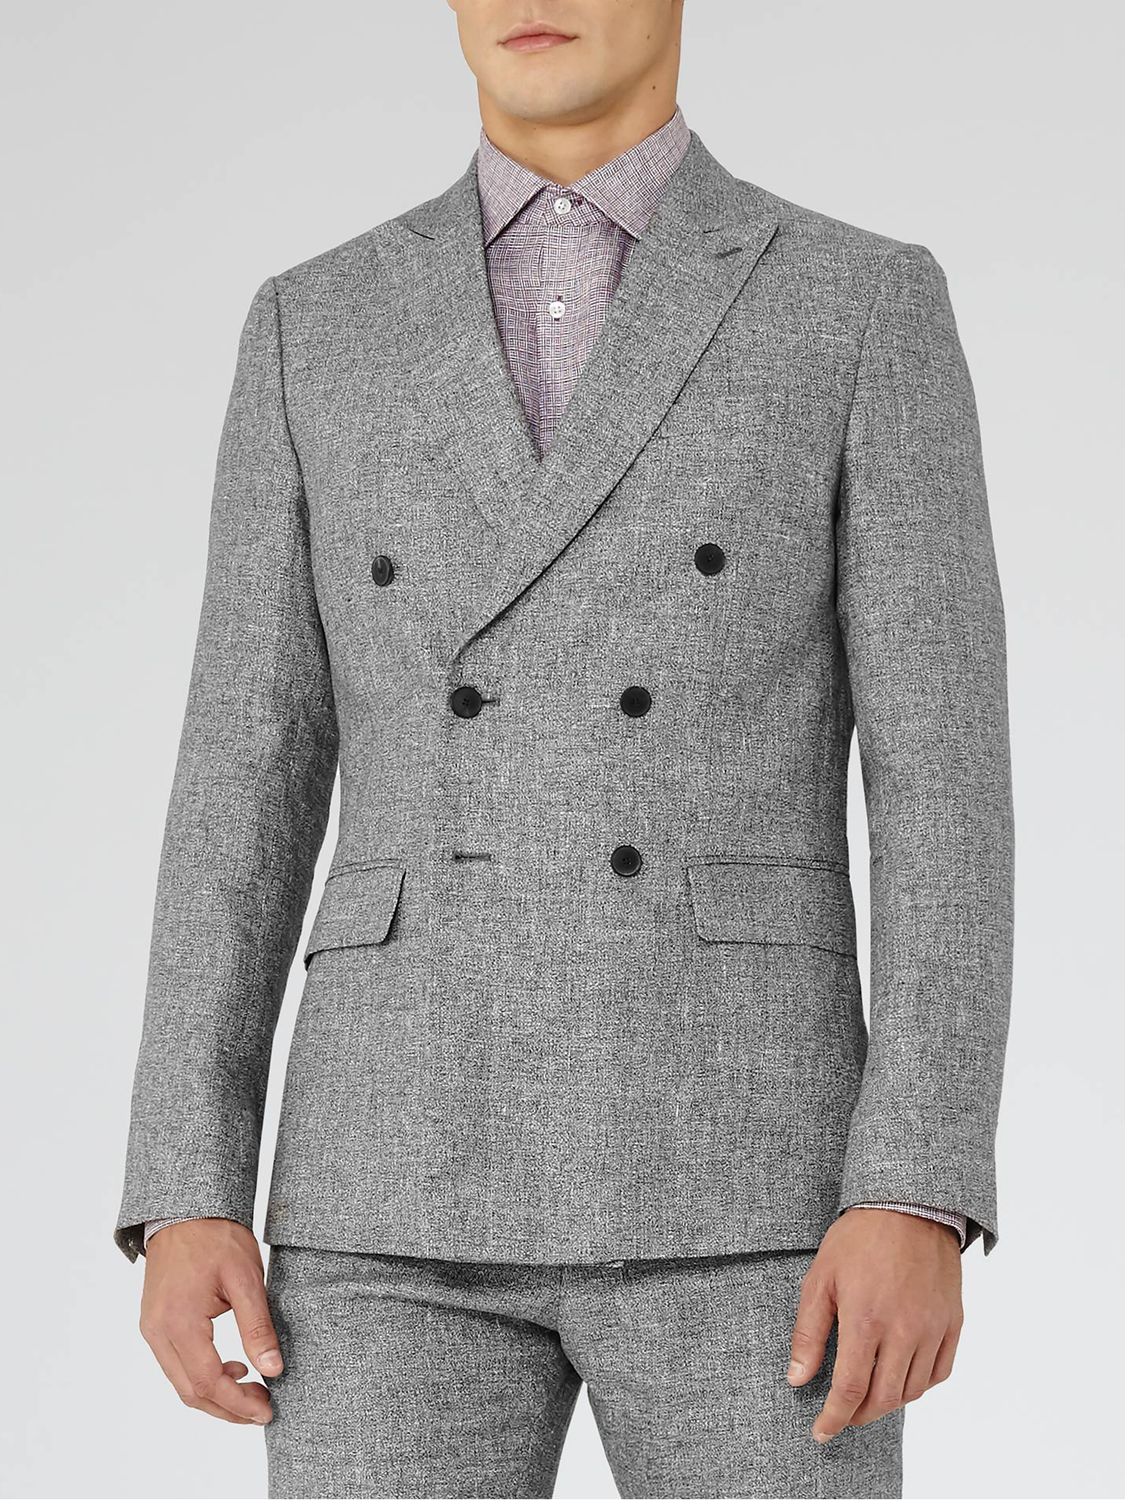 Reiss Luxor Double Breasted Linen Suit Jacket, Grey